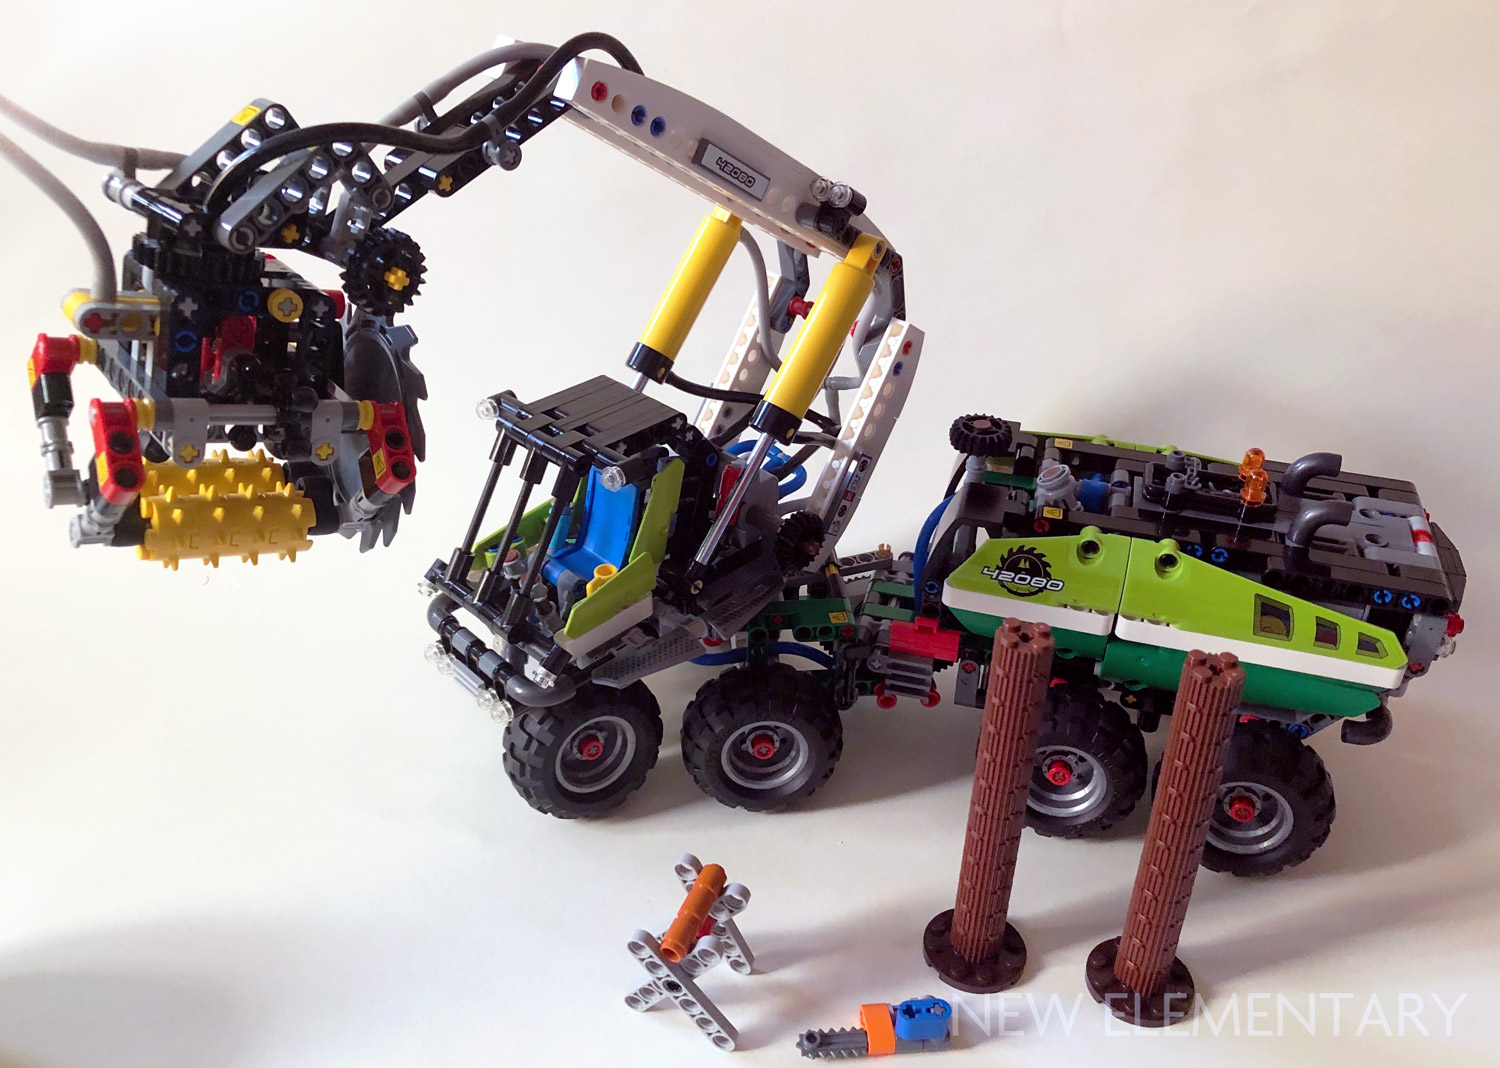 New Elementary: LEGO® parts, sets and techniques: Set review